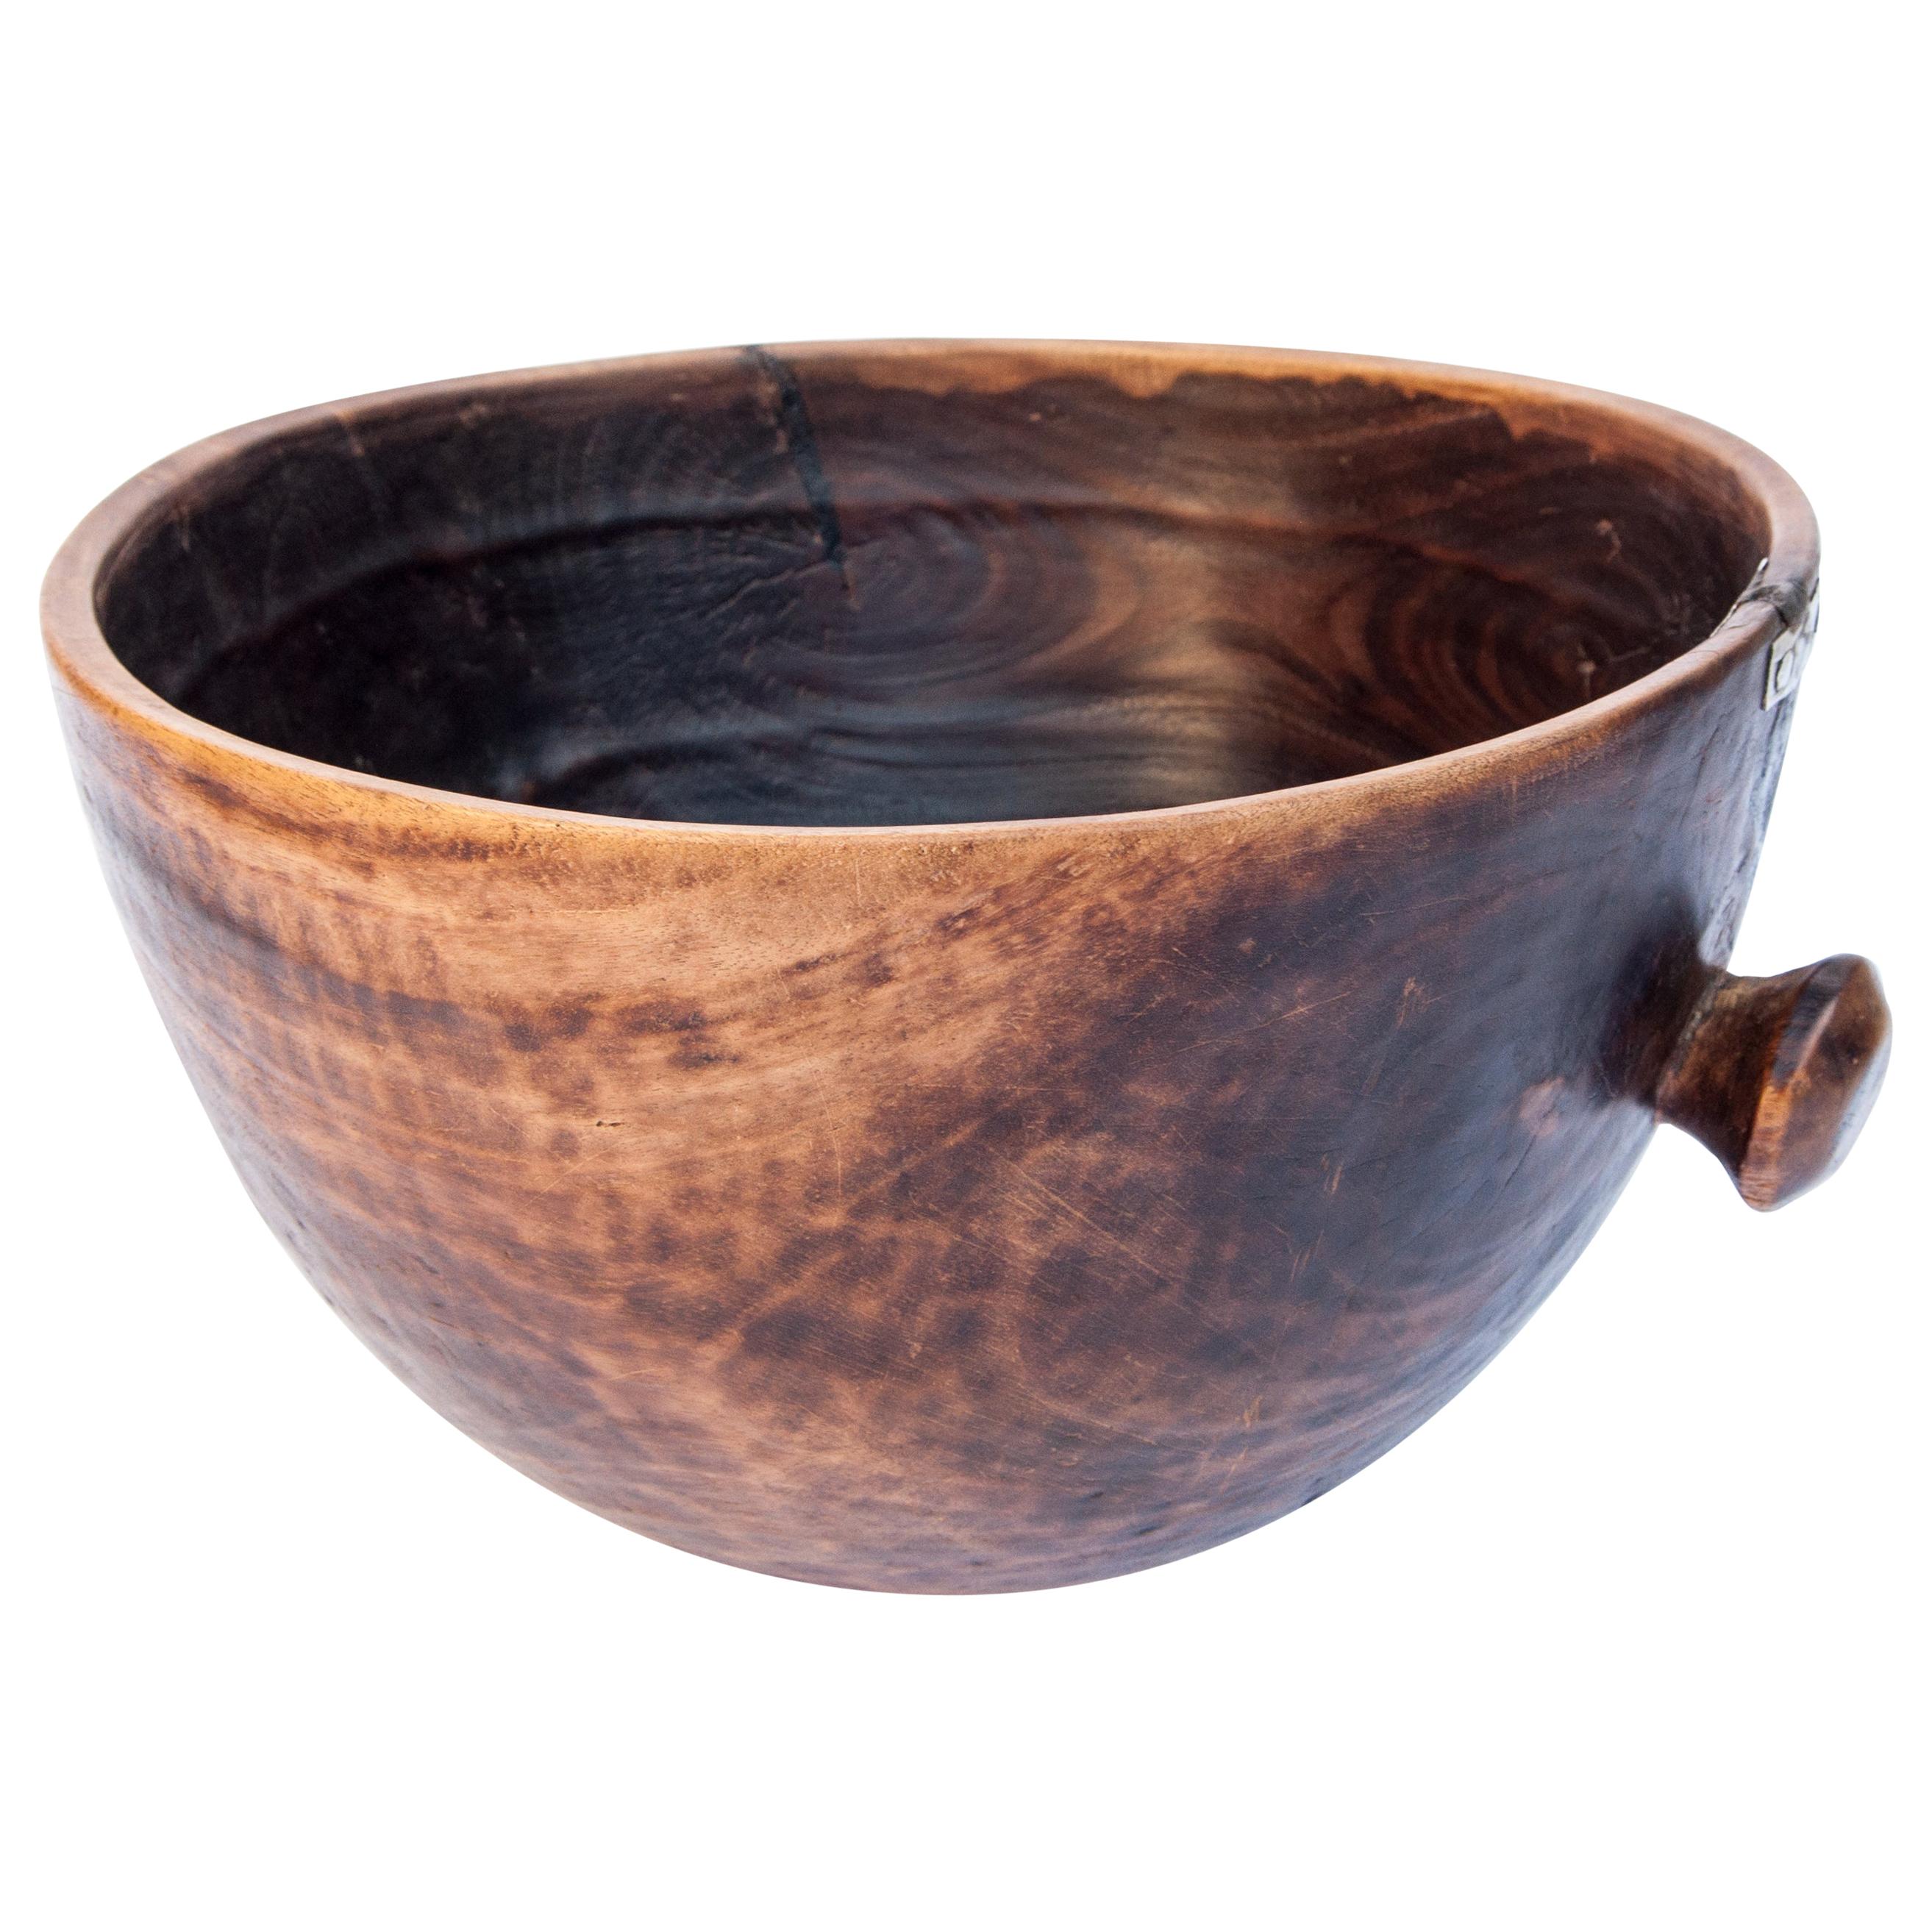 Vintage Tribal Wooden Bowl, Handhewn with Handle, West Africa, Mid-20th Century